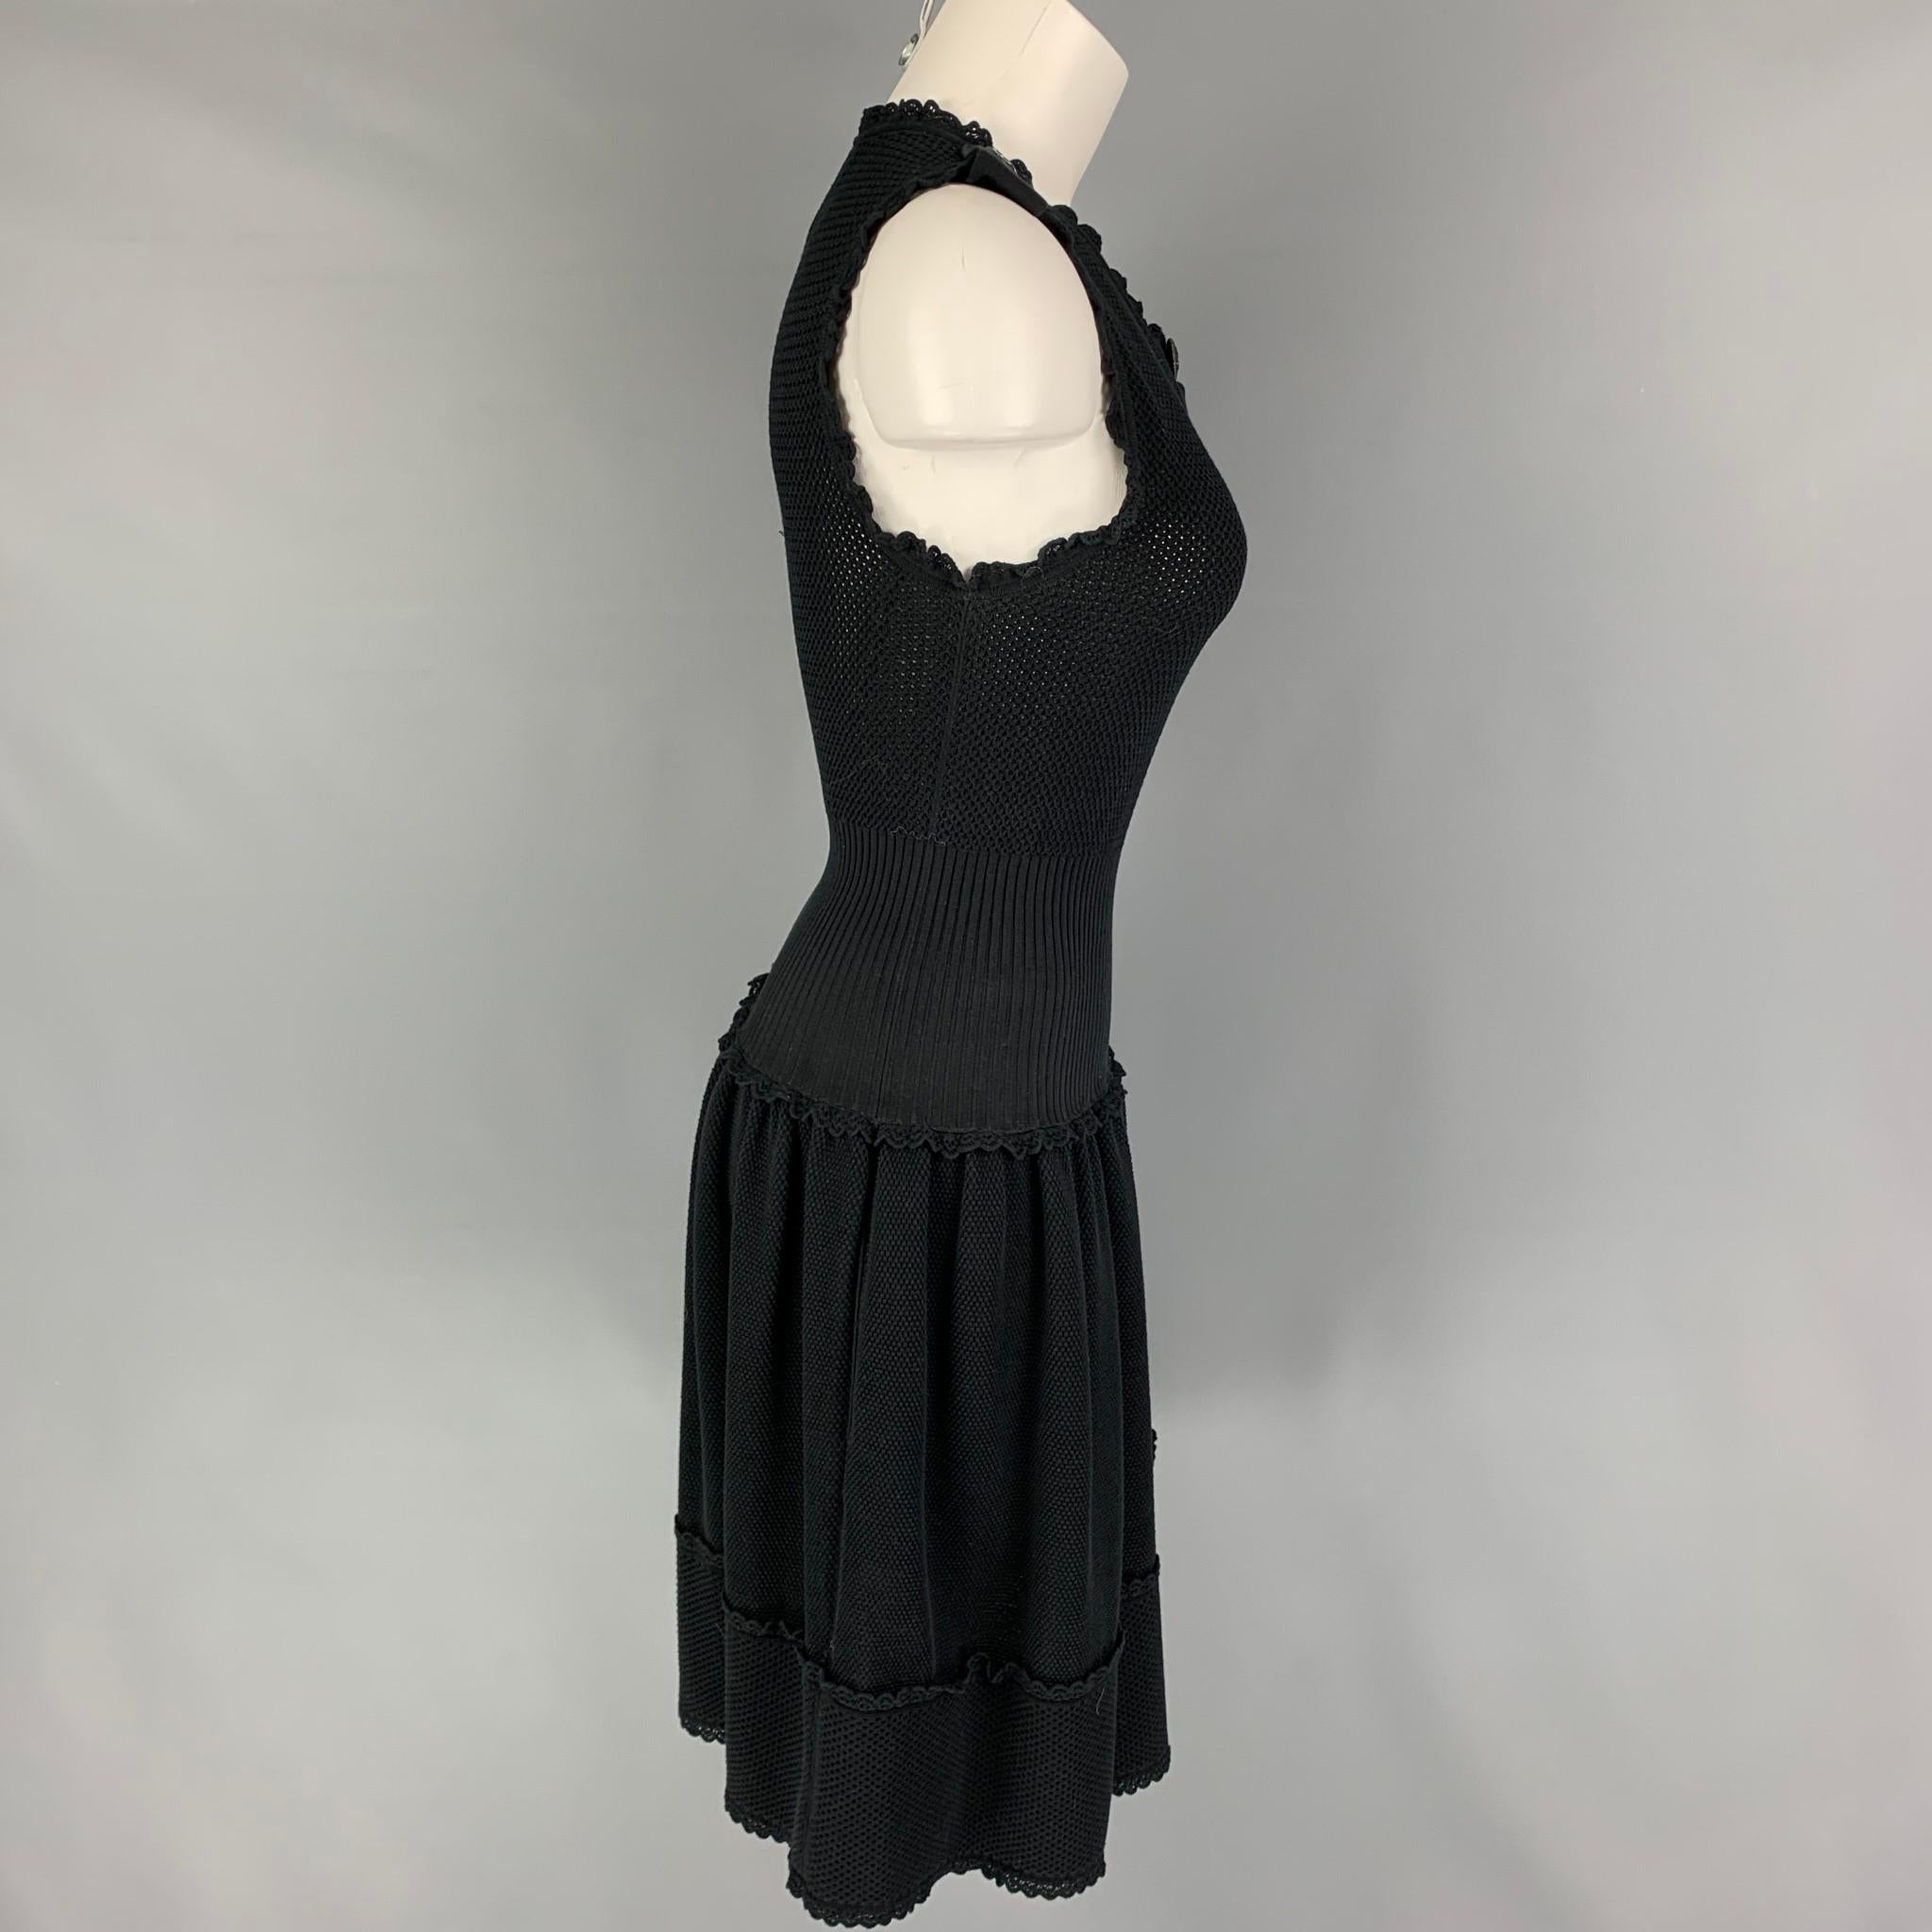 CHANEL Size 2 Black Knitted Cotton Textured Sleeveless Dress 1